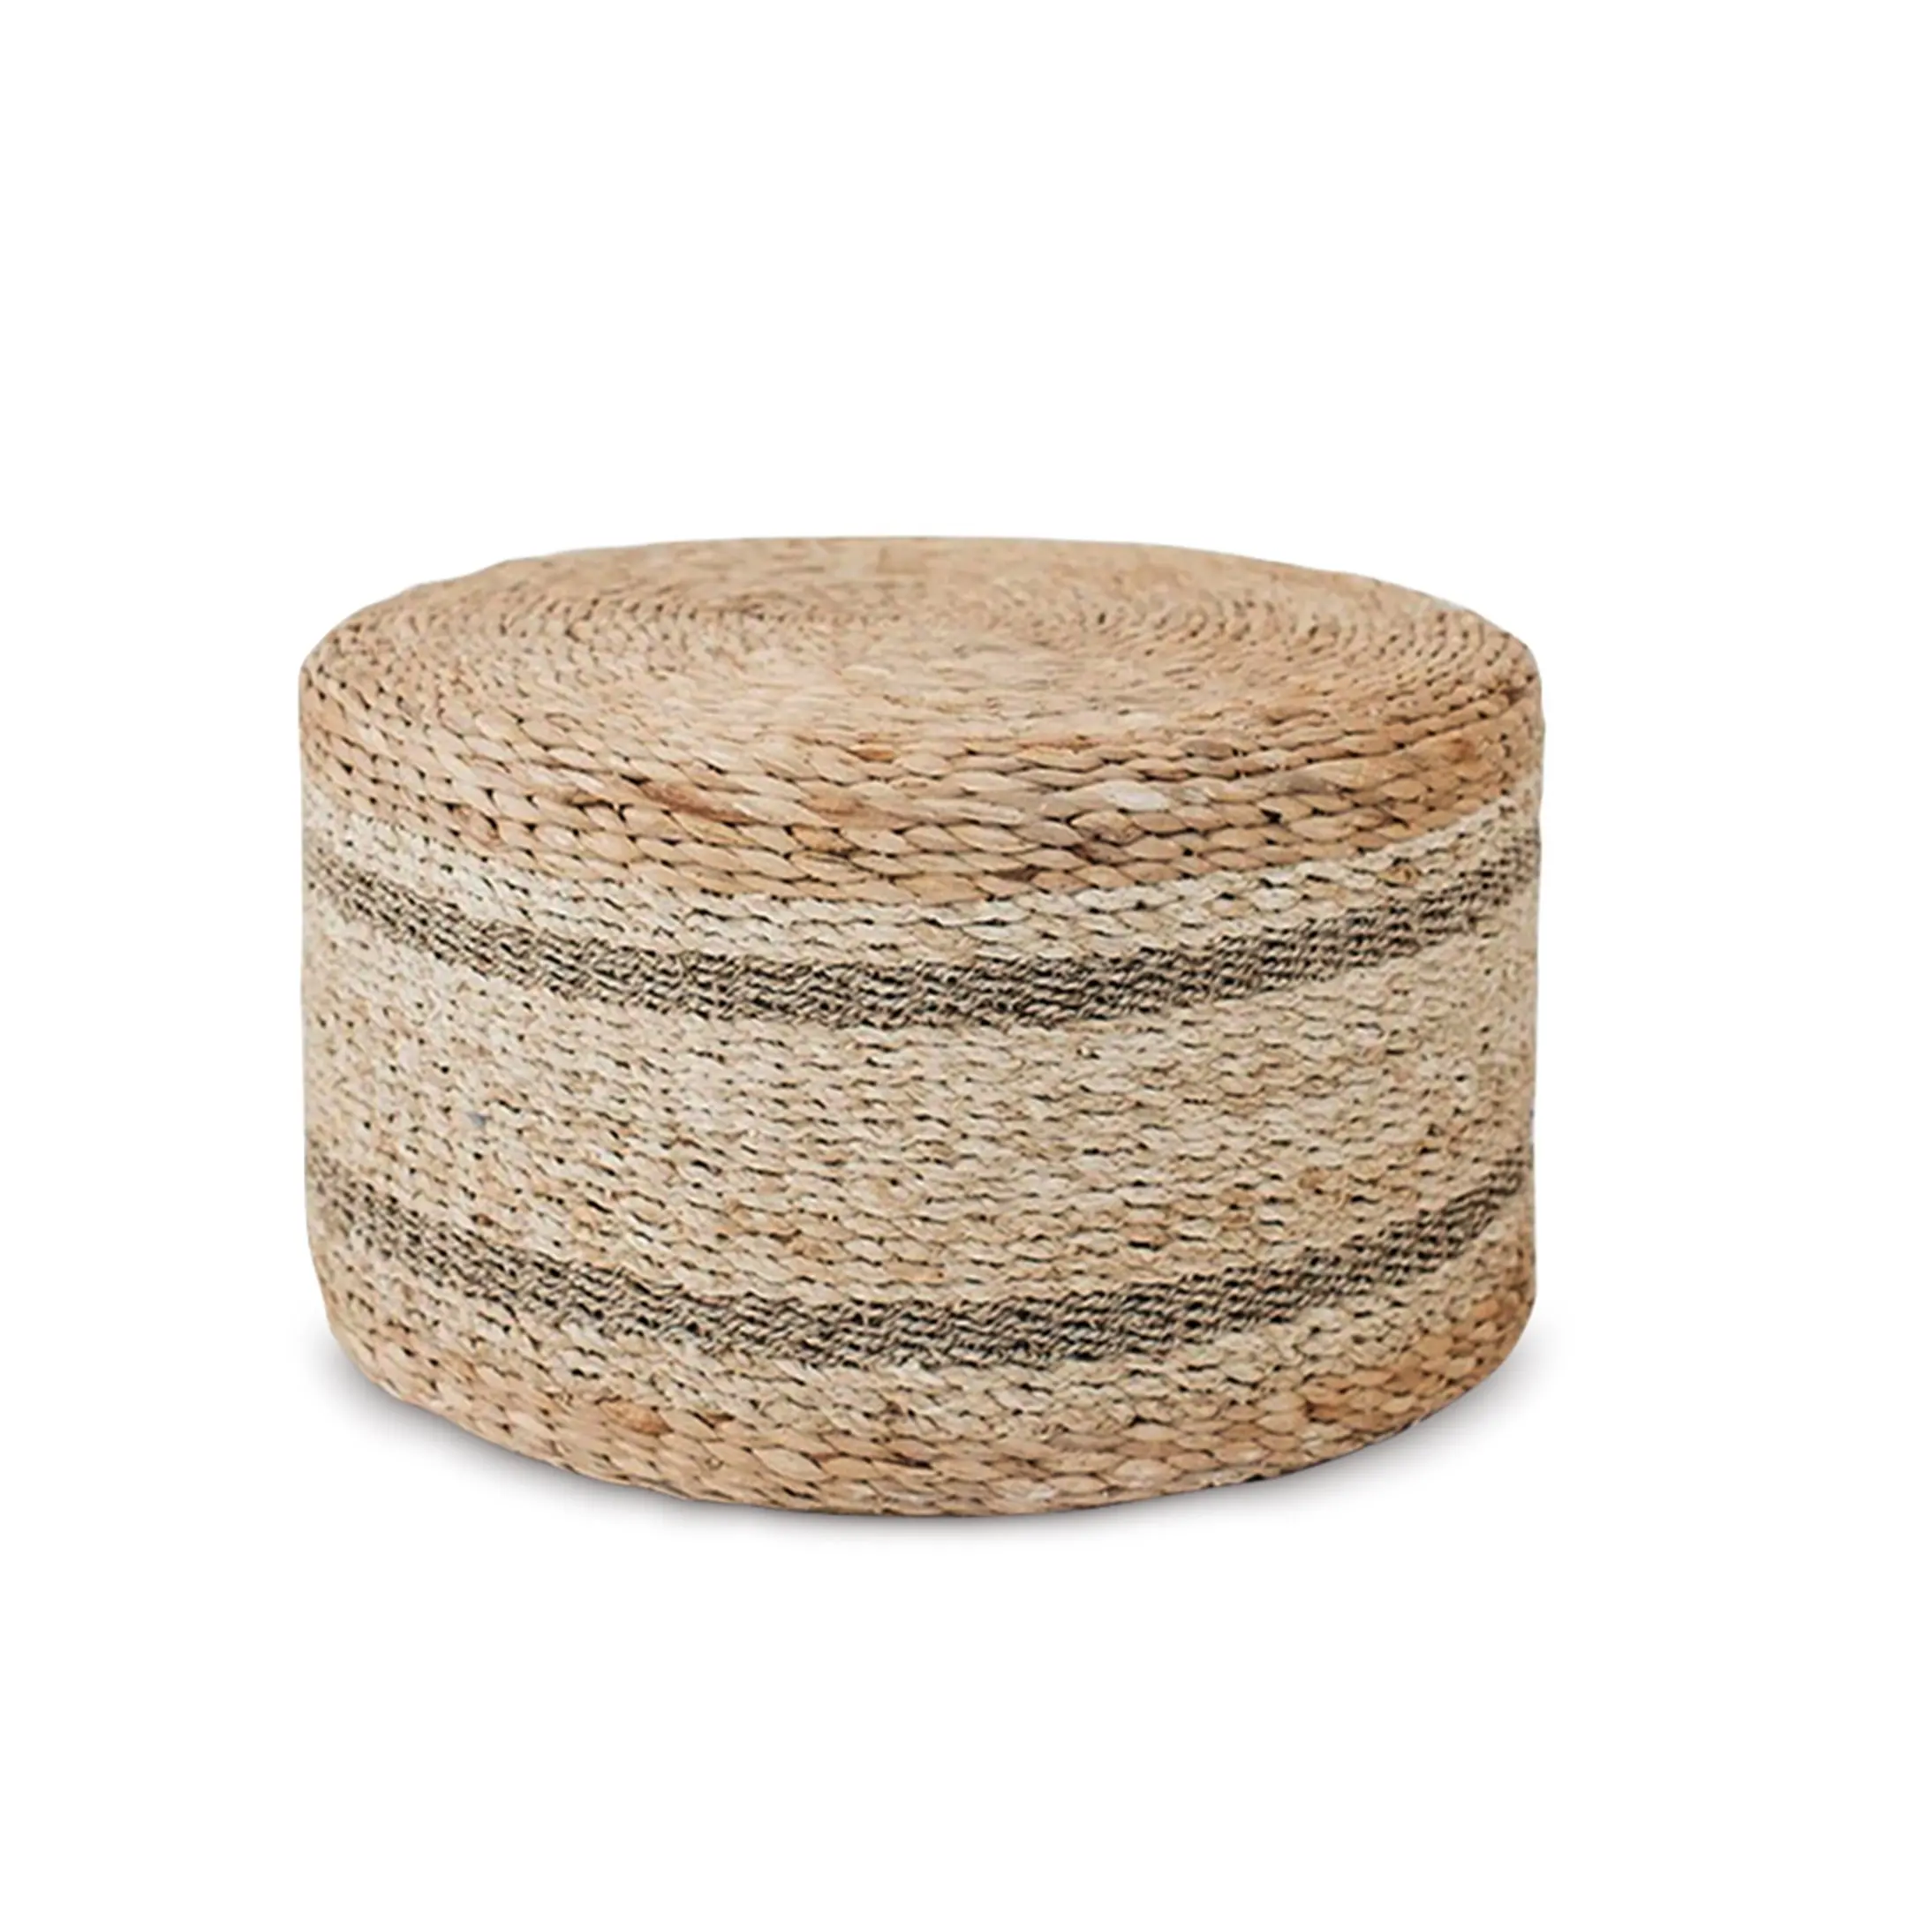 Best choice Pouf Espagne Mix Of Seagrass Water Hyacinth Adorable Interior Decoration Made in Vietnam